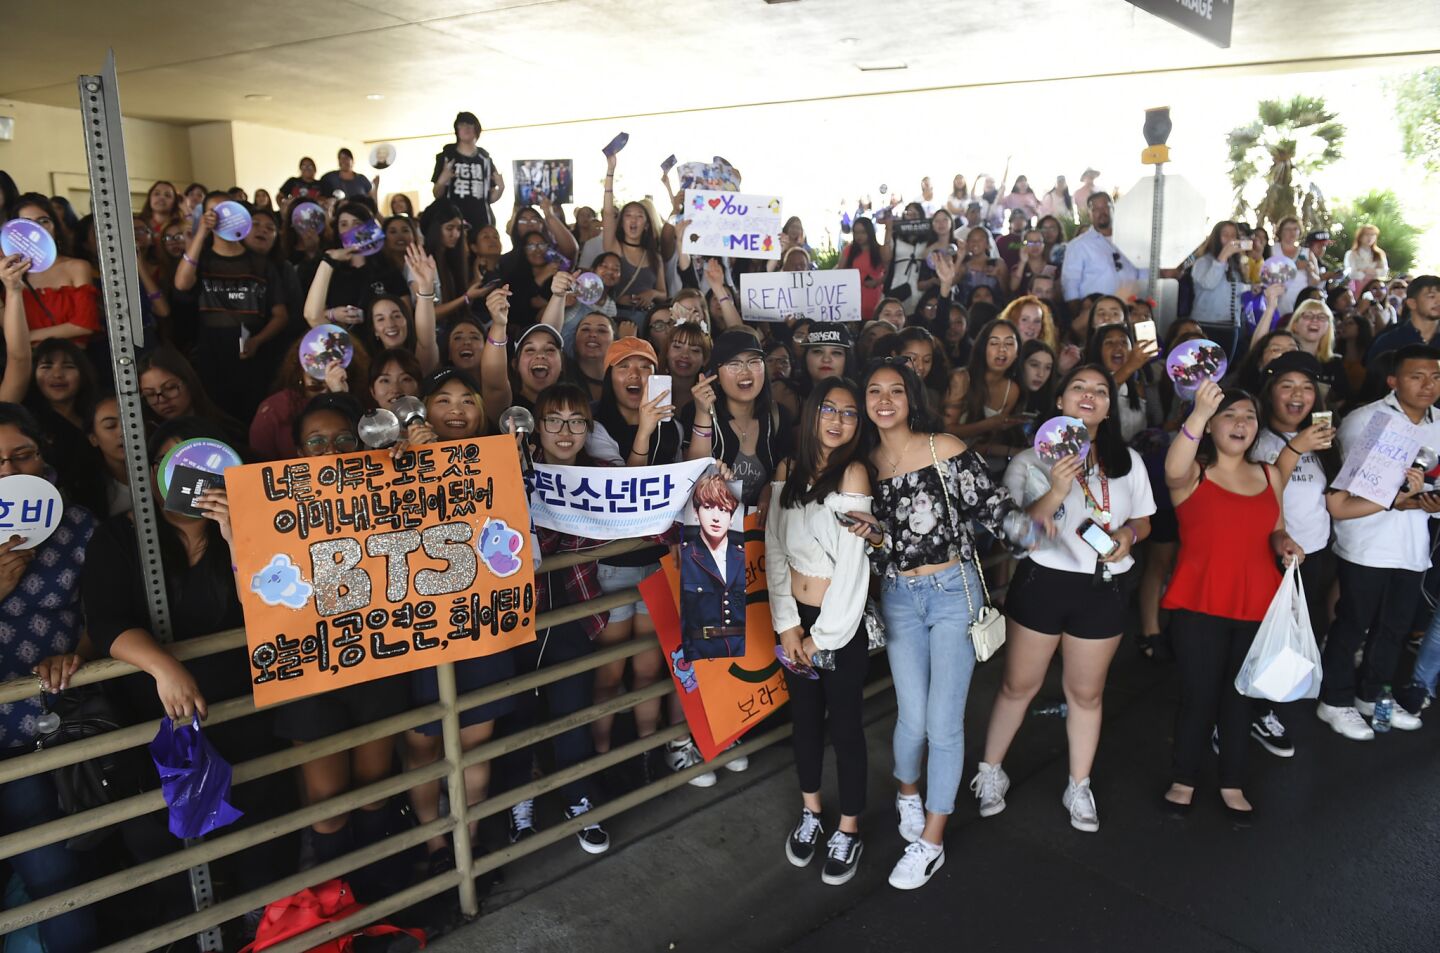 BTS fans wait outside the red carpet before the start of the Billboard Music Awards at the MGM Grand Garden Arena in Las Vegas.